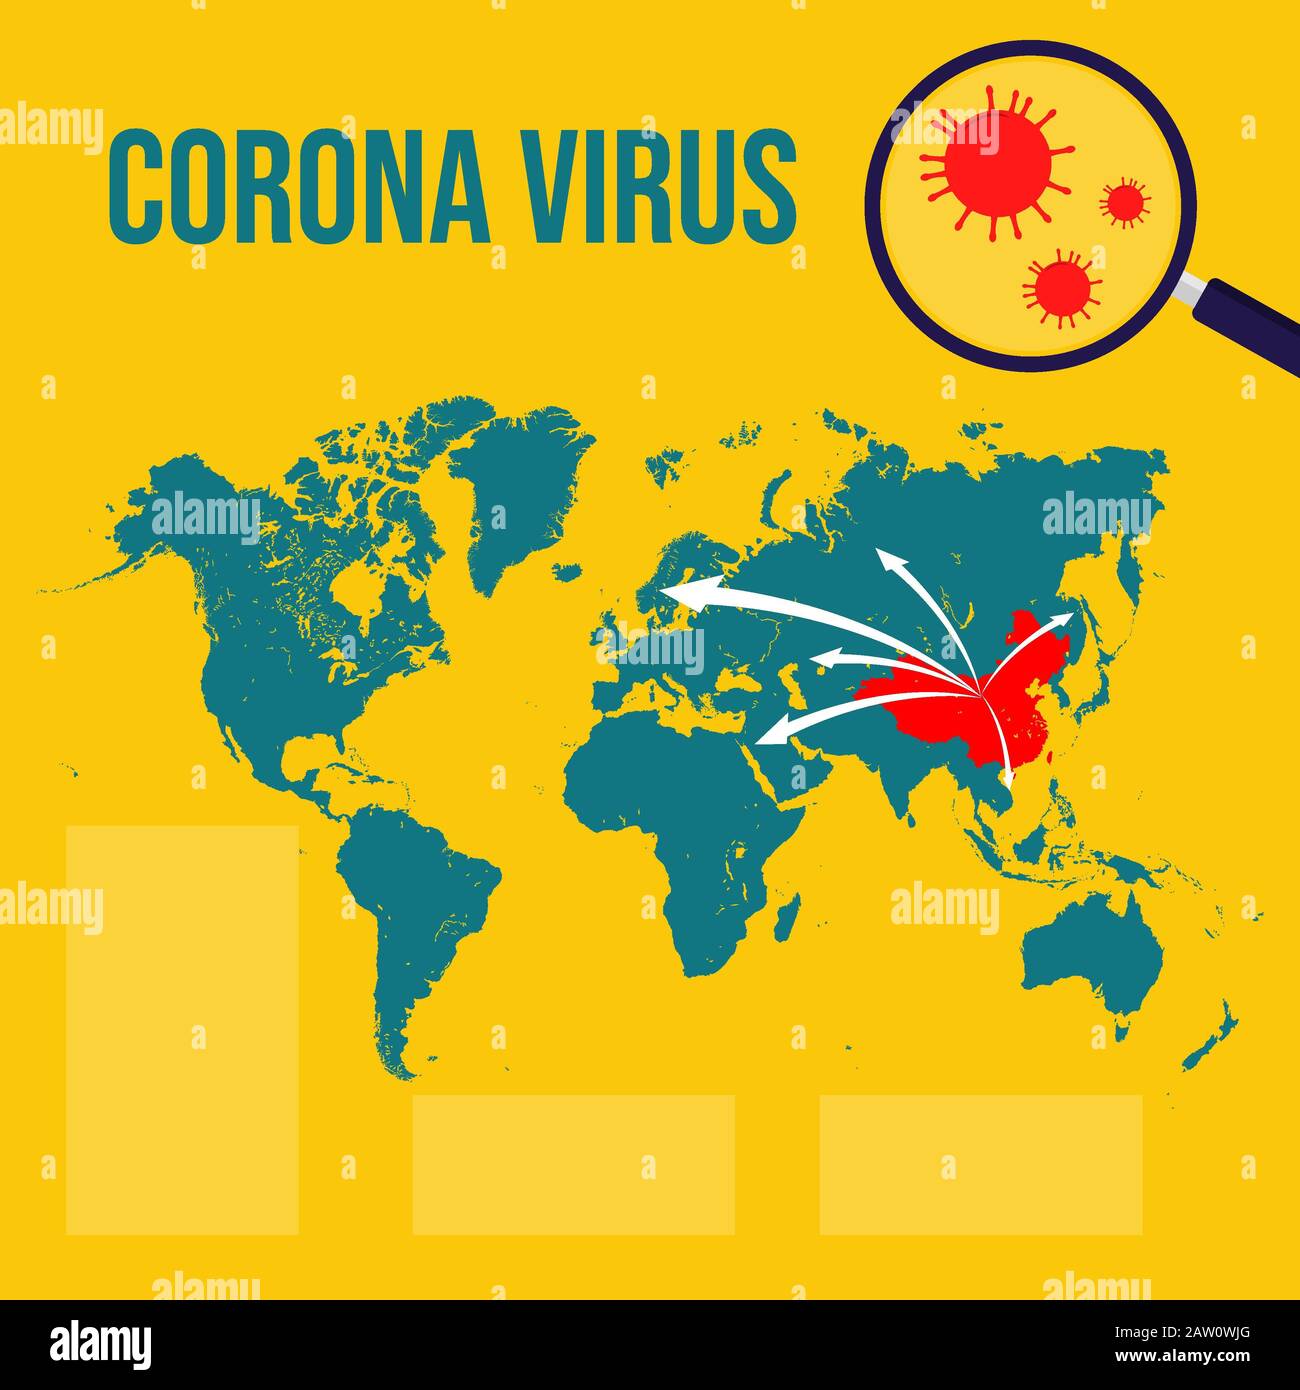 corona virus with world map. Spread of corona virus. virus and lop icon. isolated map world. info graphic template. social media post, brochure, poste Stock Photo